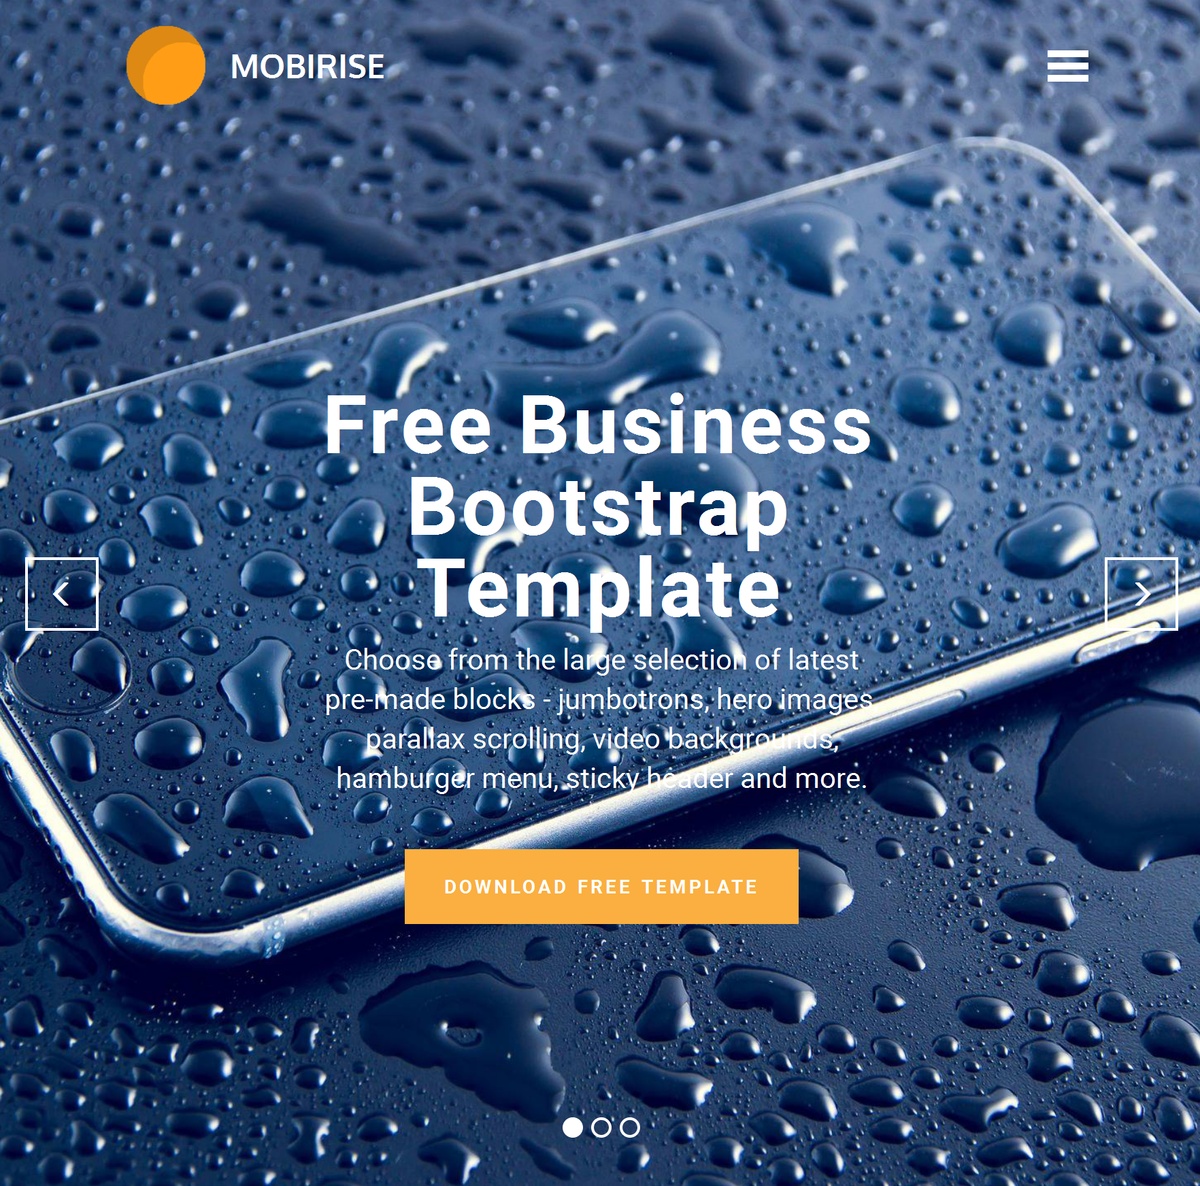 Bootstrap Responsive Web Templates Themes Extensions